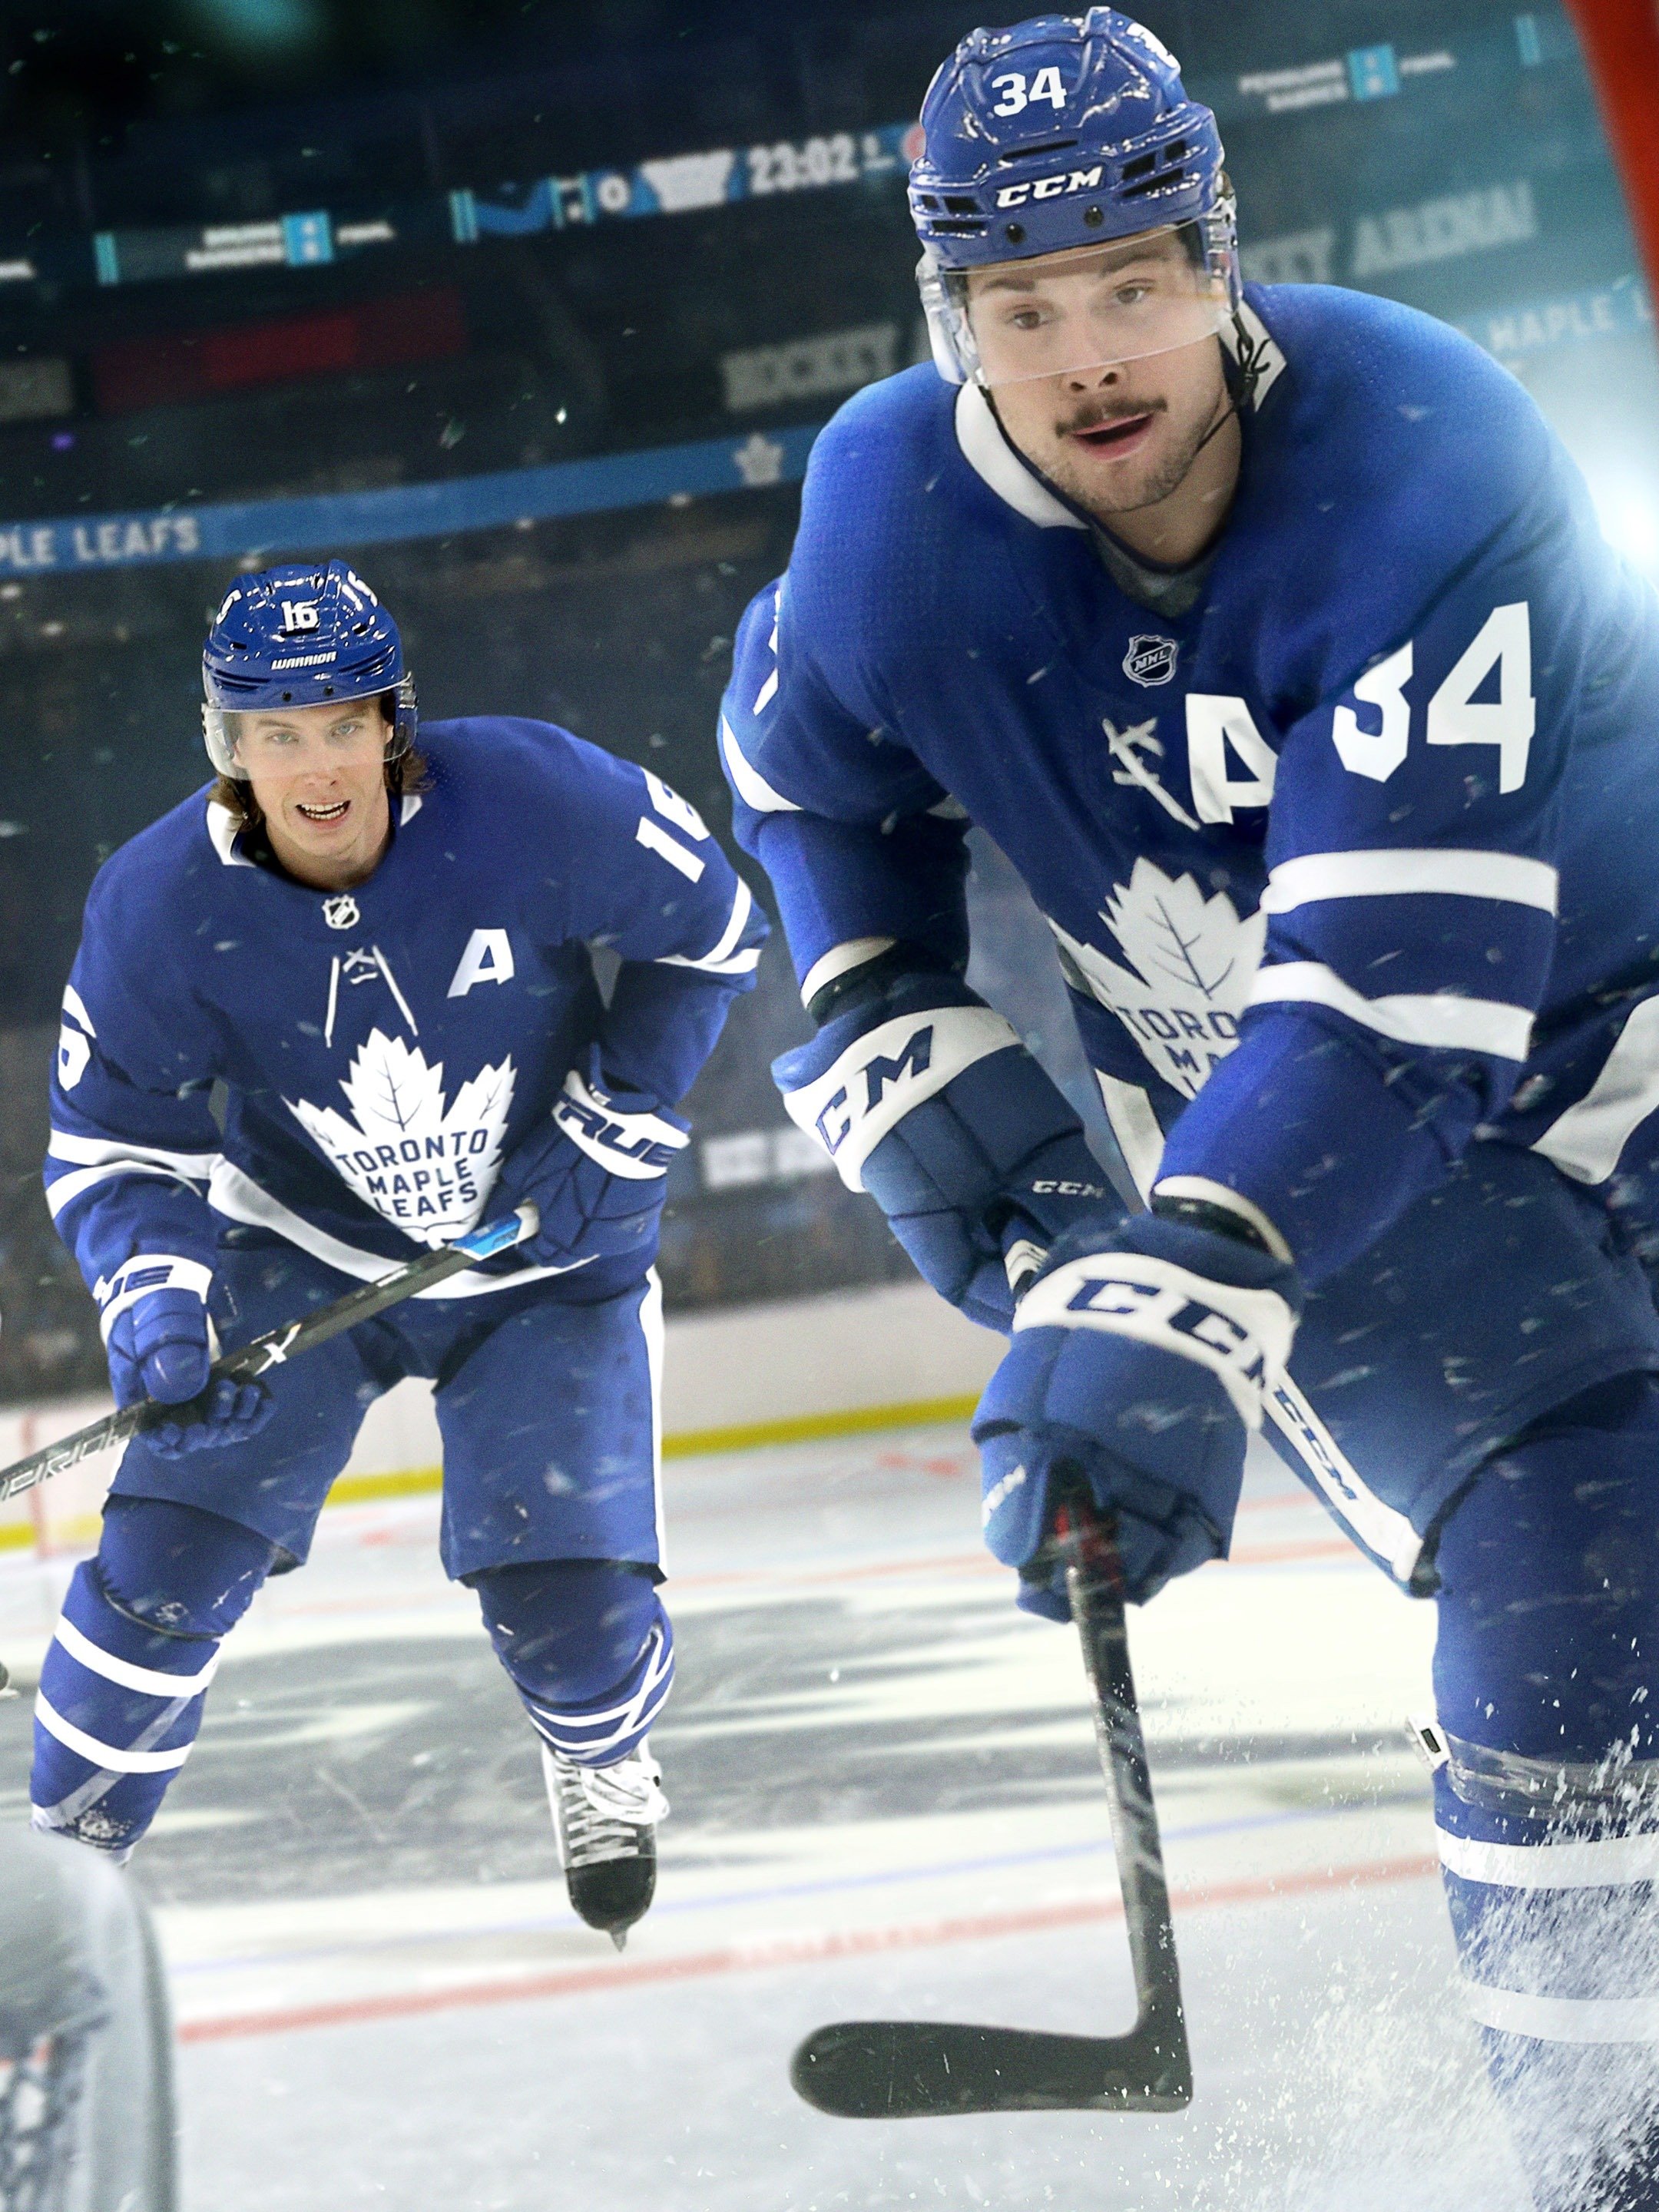 All or Nothing: Toronto Maple Leafs (TV Series 2021) - IMDb